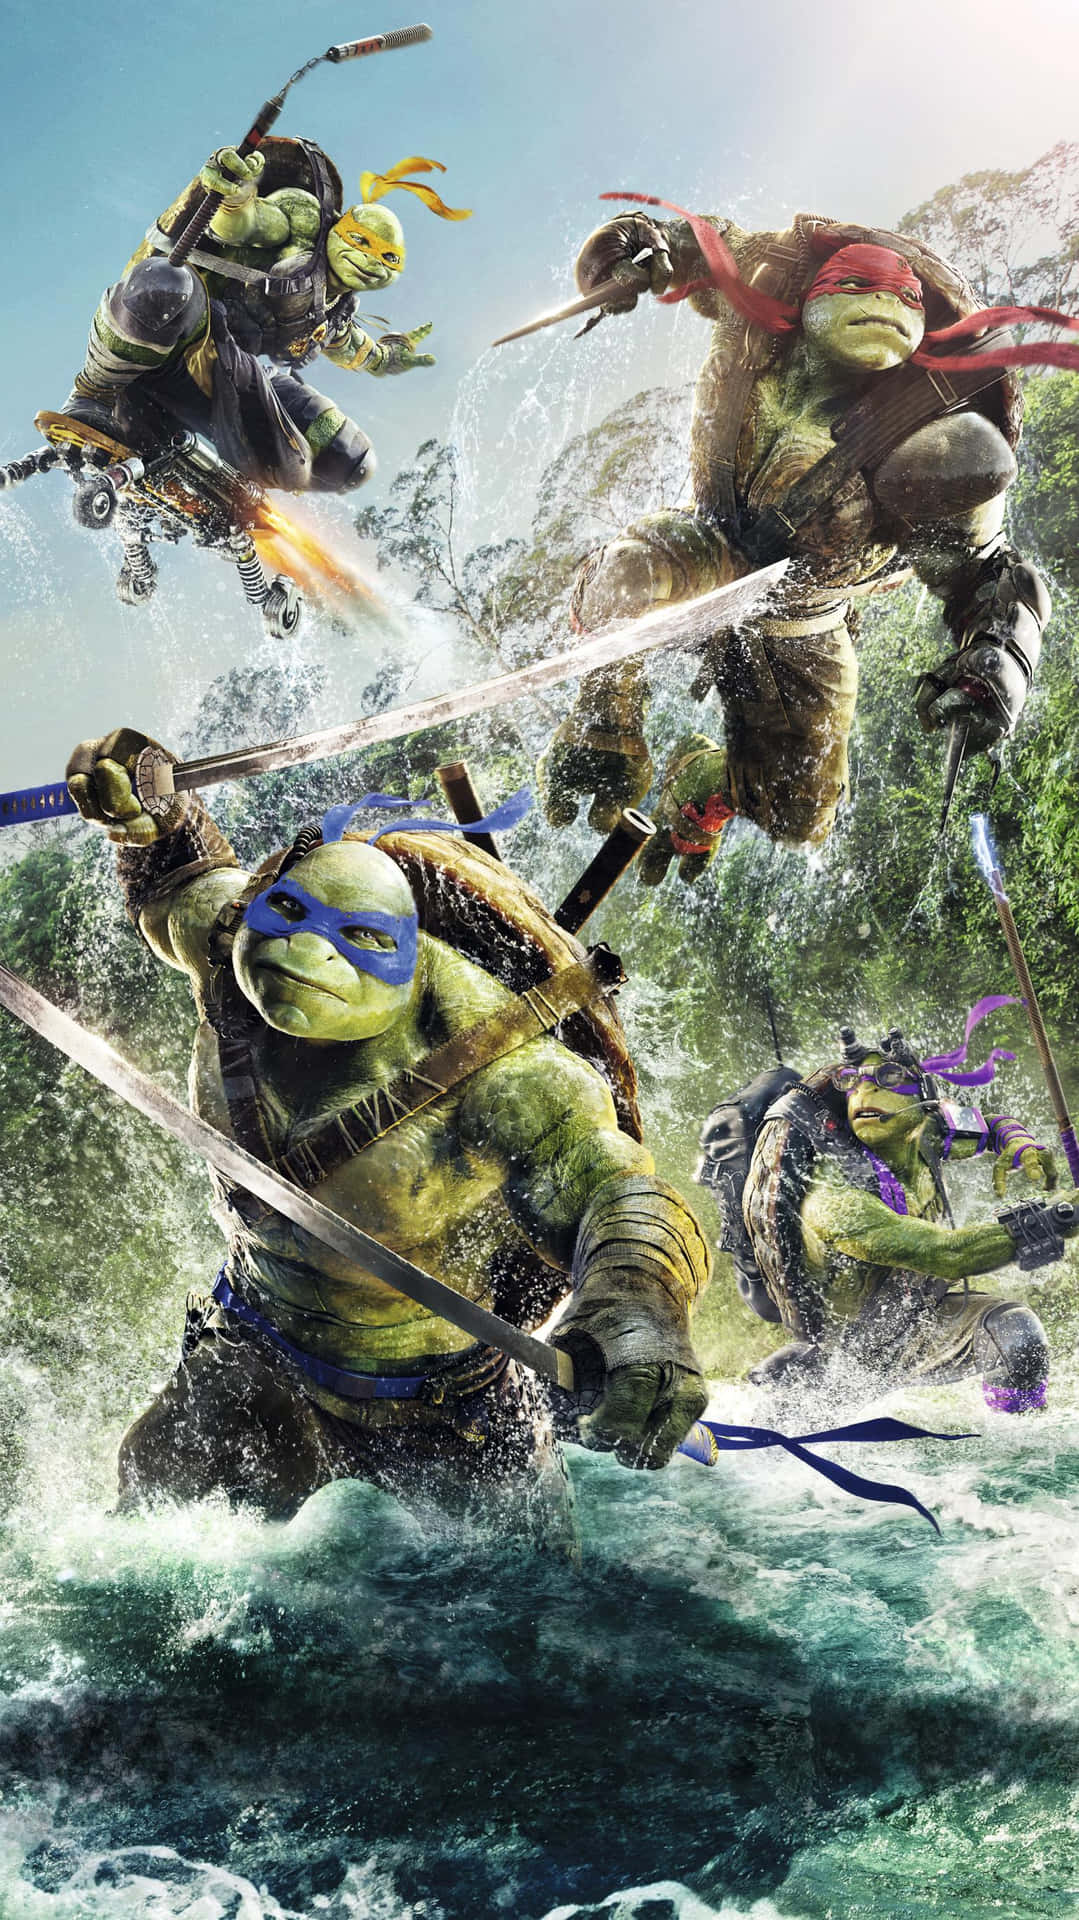 38 Ninja Turtles Movie Wallpapers HD 4K 5K for PC and Mobile  Download  free images for iPhone Android